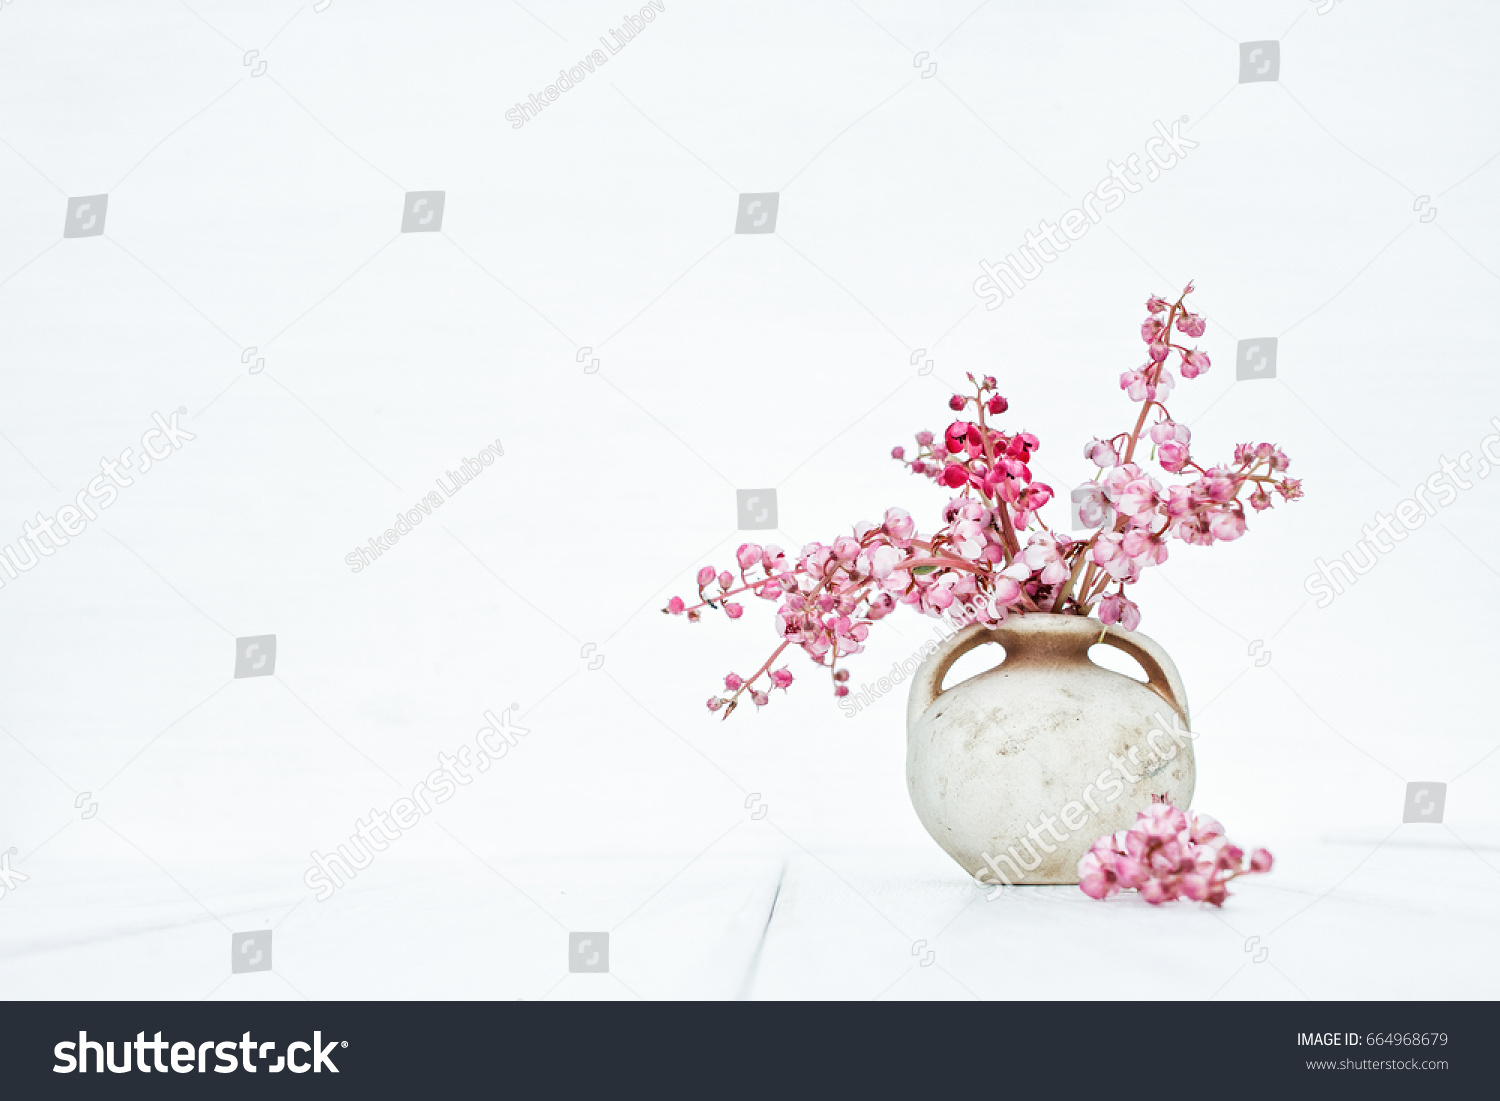 Pink flowers in vintage vase on a stylish white background. Beautiful fantasy romantic minimalist still life. Space for text #664968679